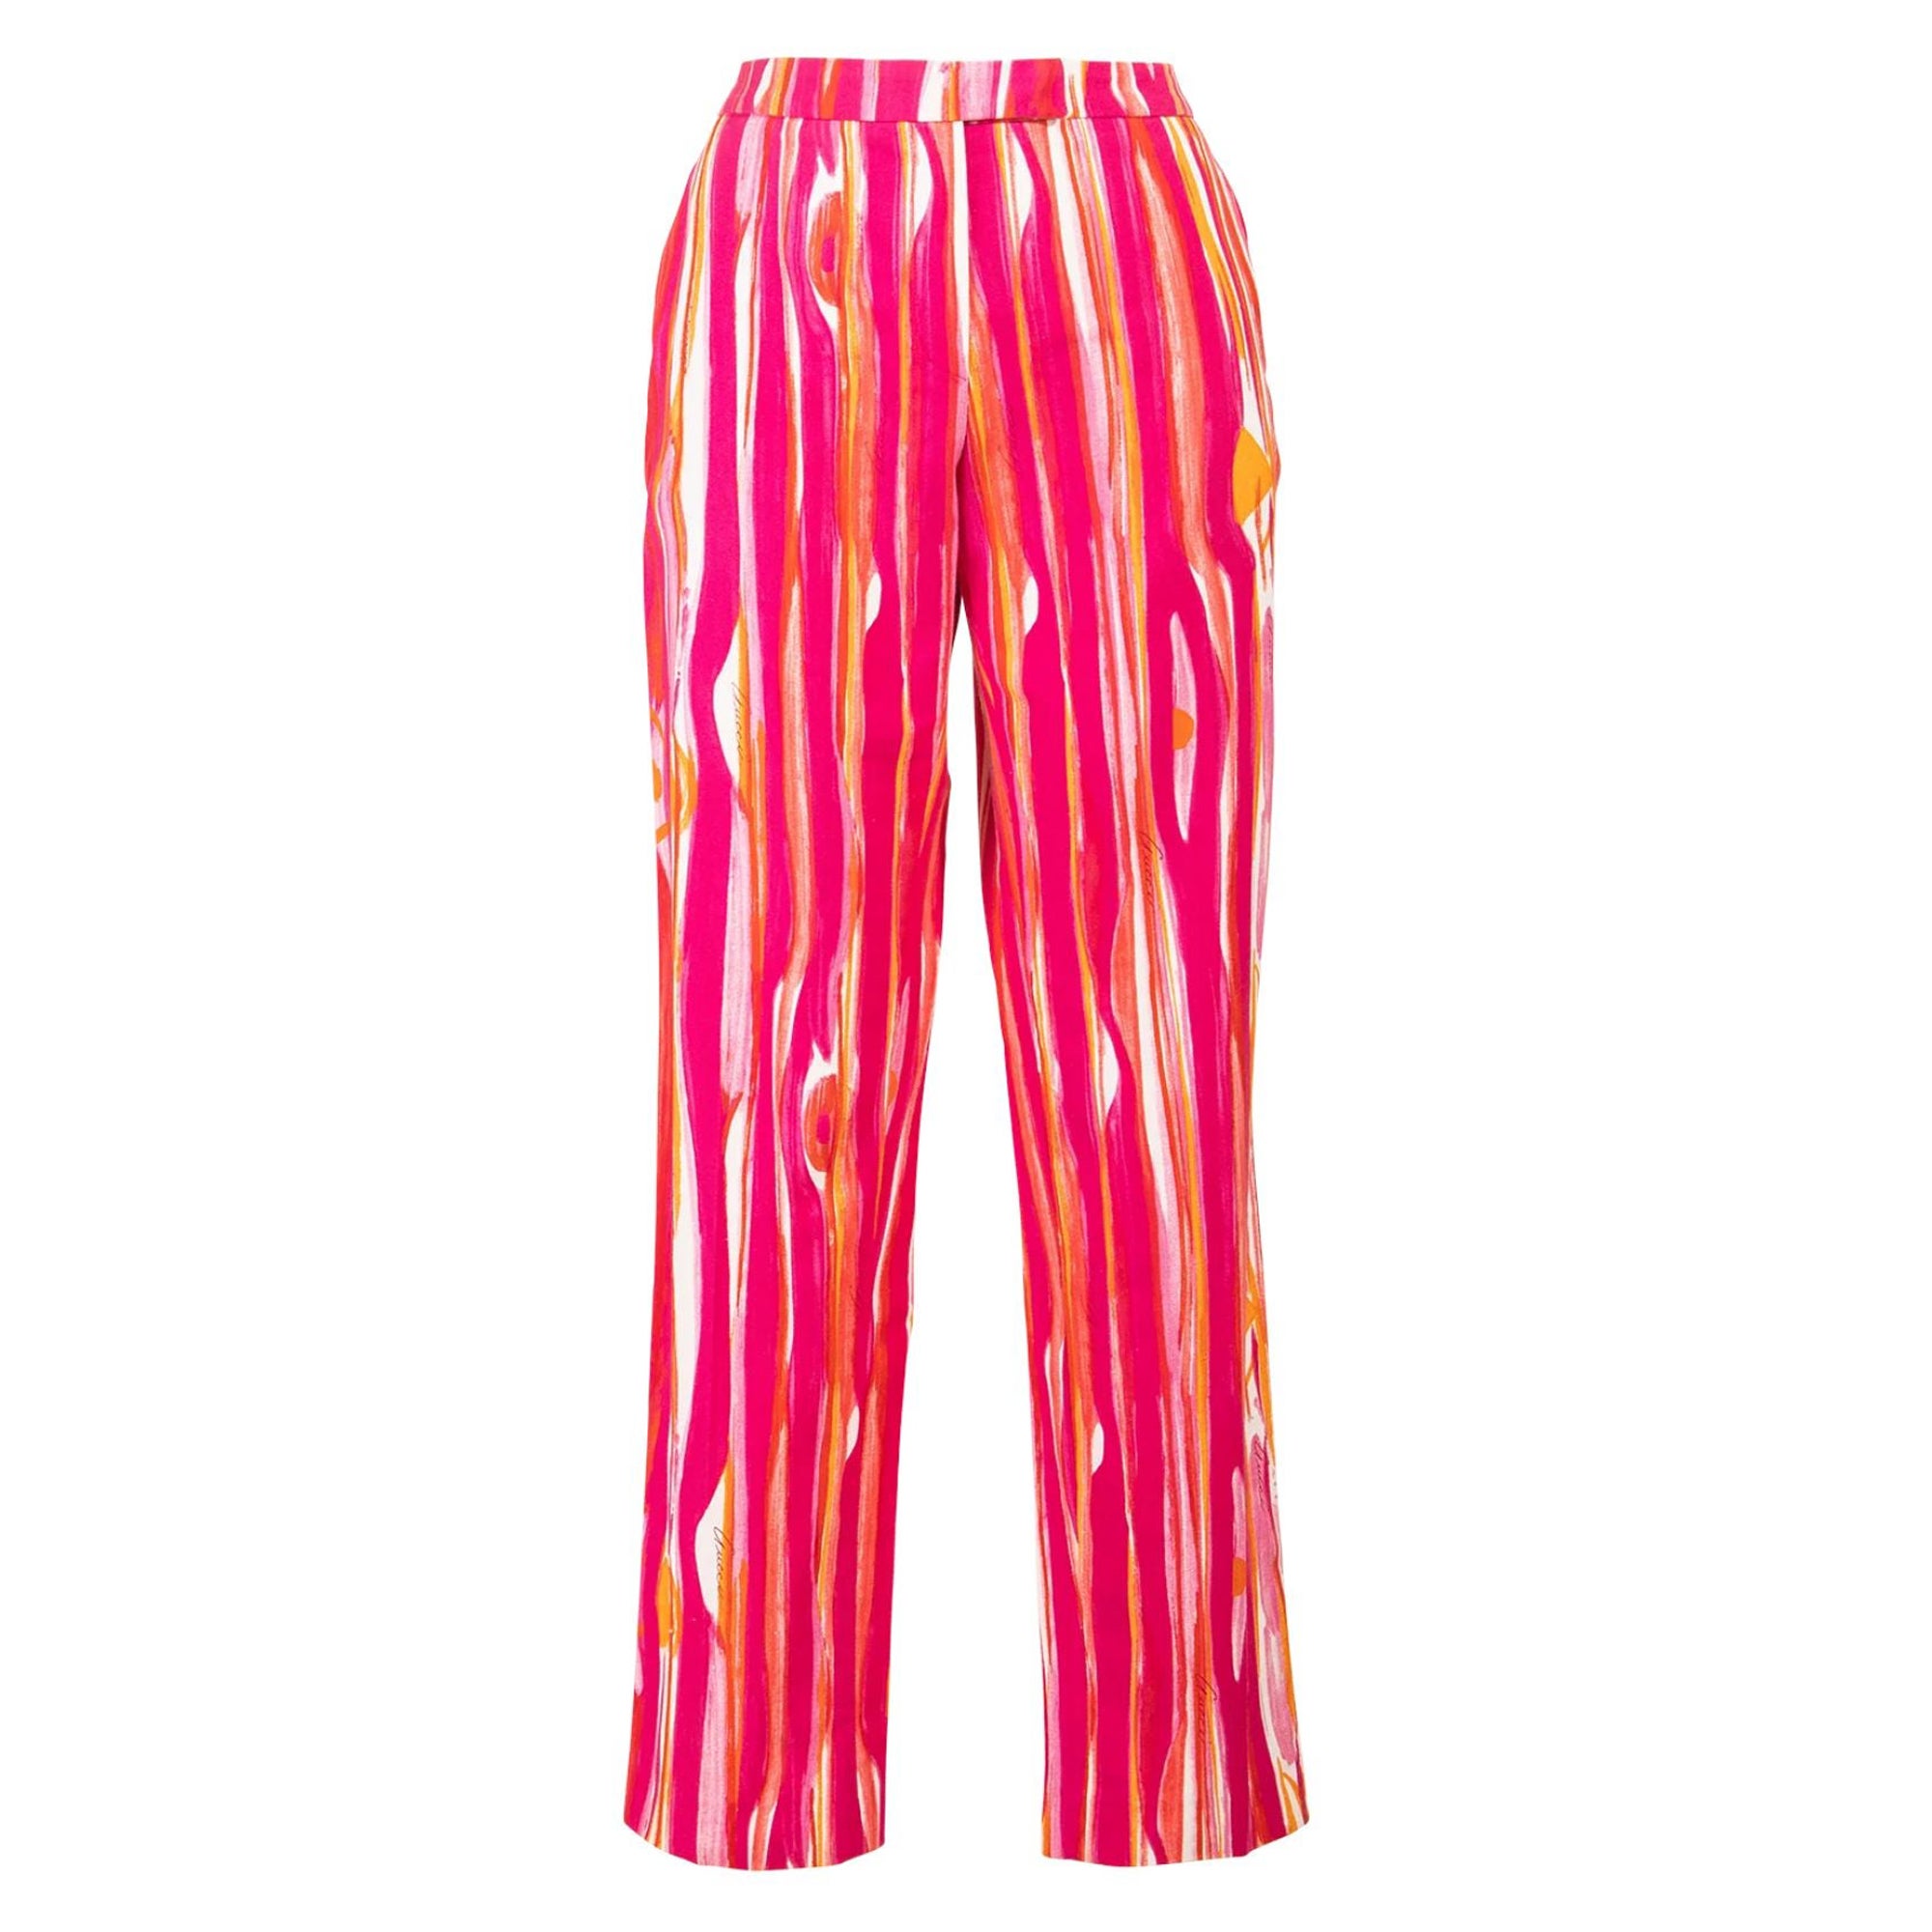 S/S 1996 Gucci by Tom Ford Pink Pattern Trouser For Sale